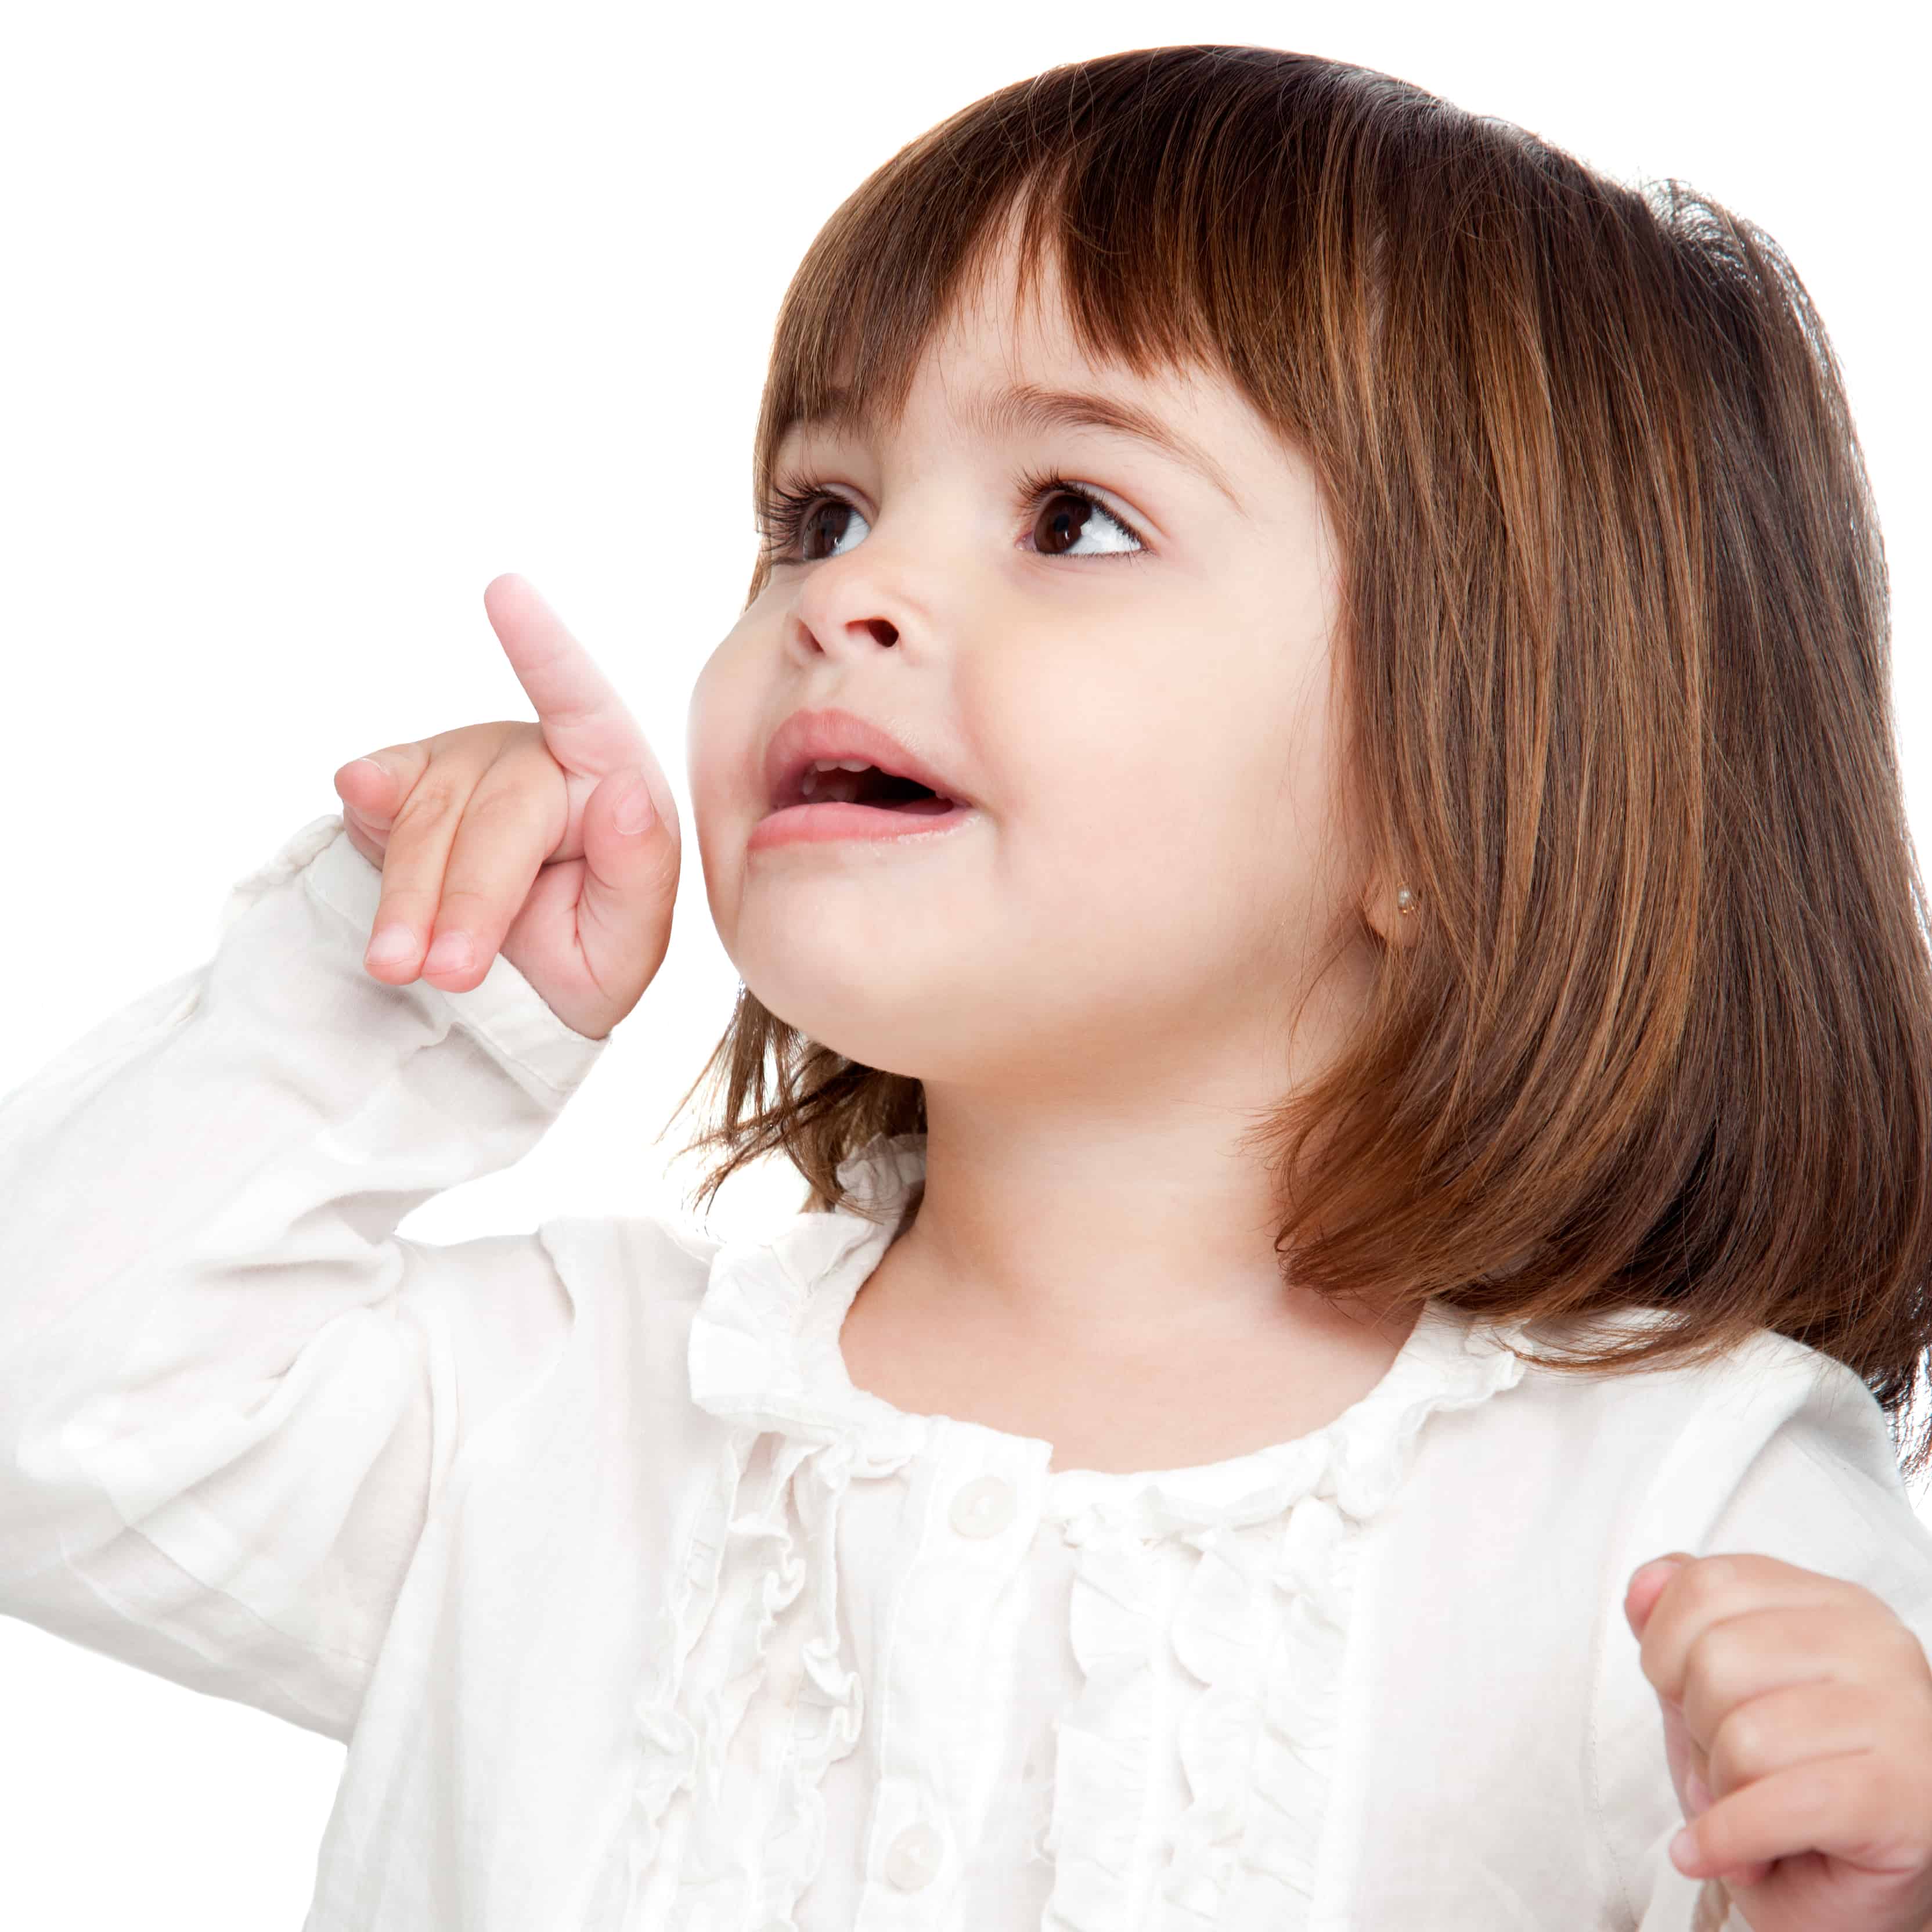 Helping non verbal toddlers communicate